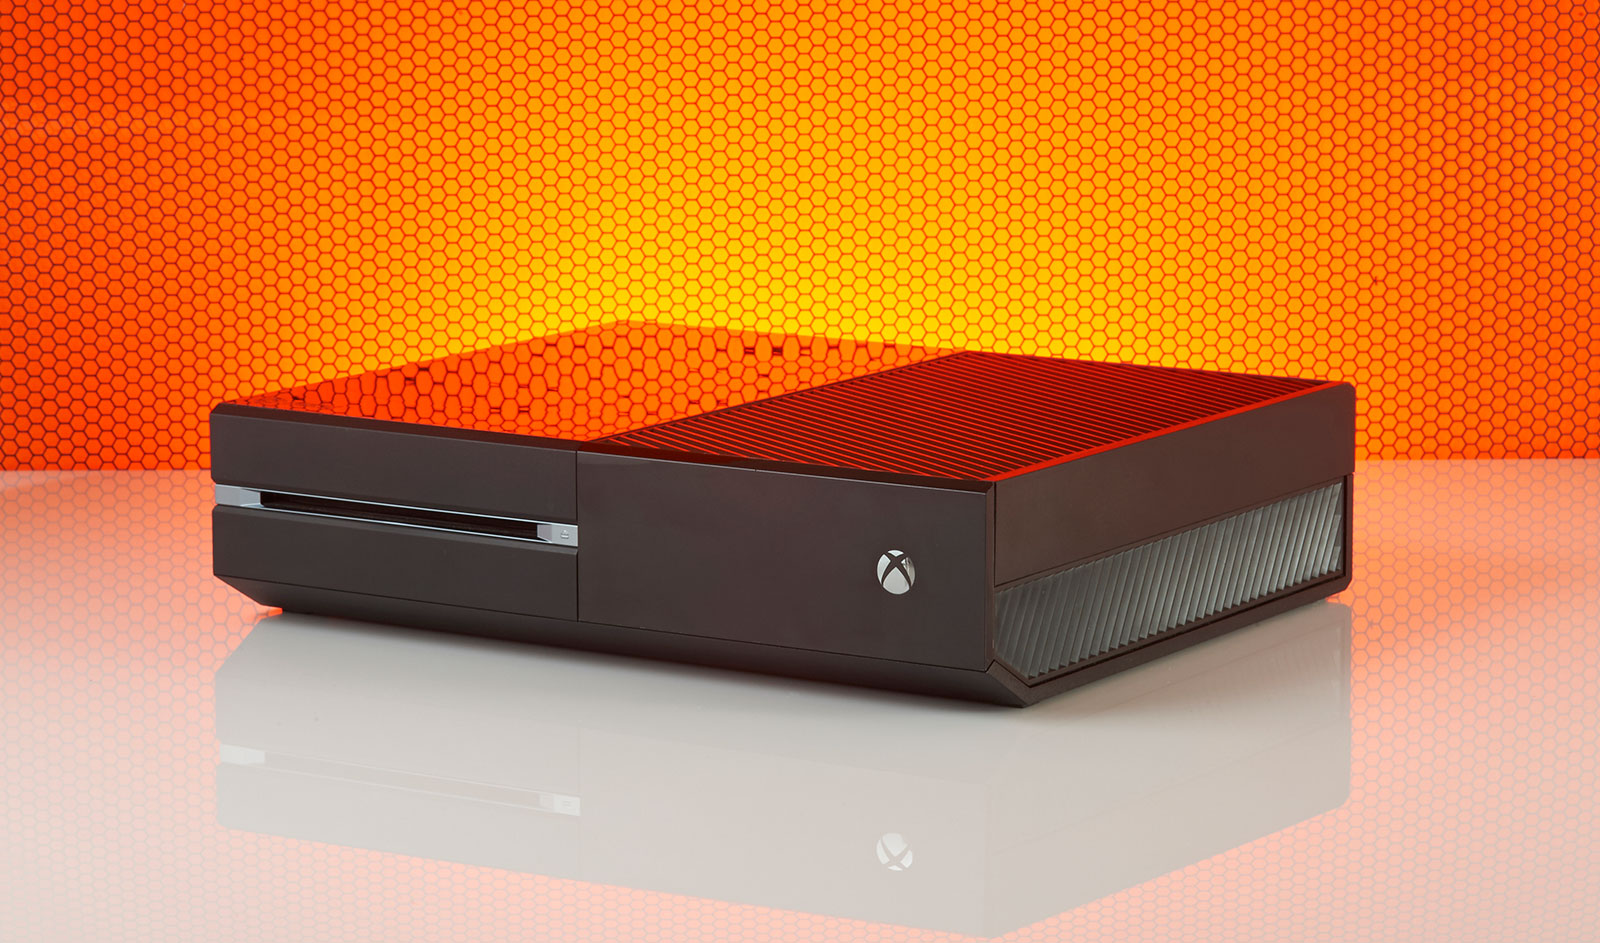 The Xbox One revisited: Microsoft&#039;s console has gotten better with age